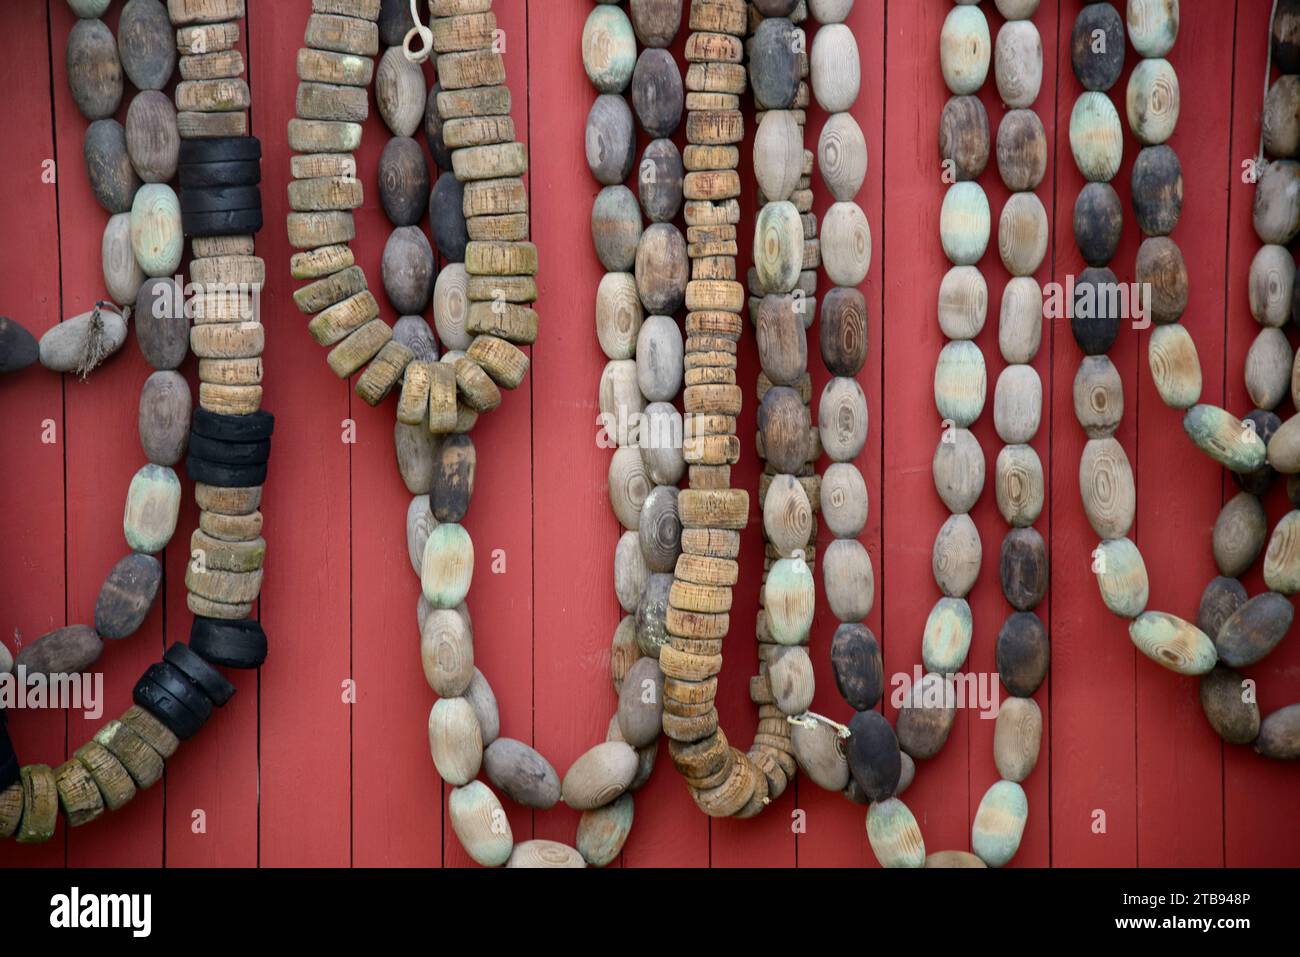 Fishing net floats and buoys hanging on a door; Petersburg, Alaska, United States of America Stock Photo